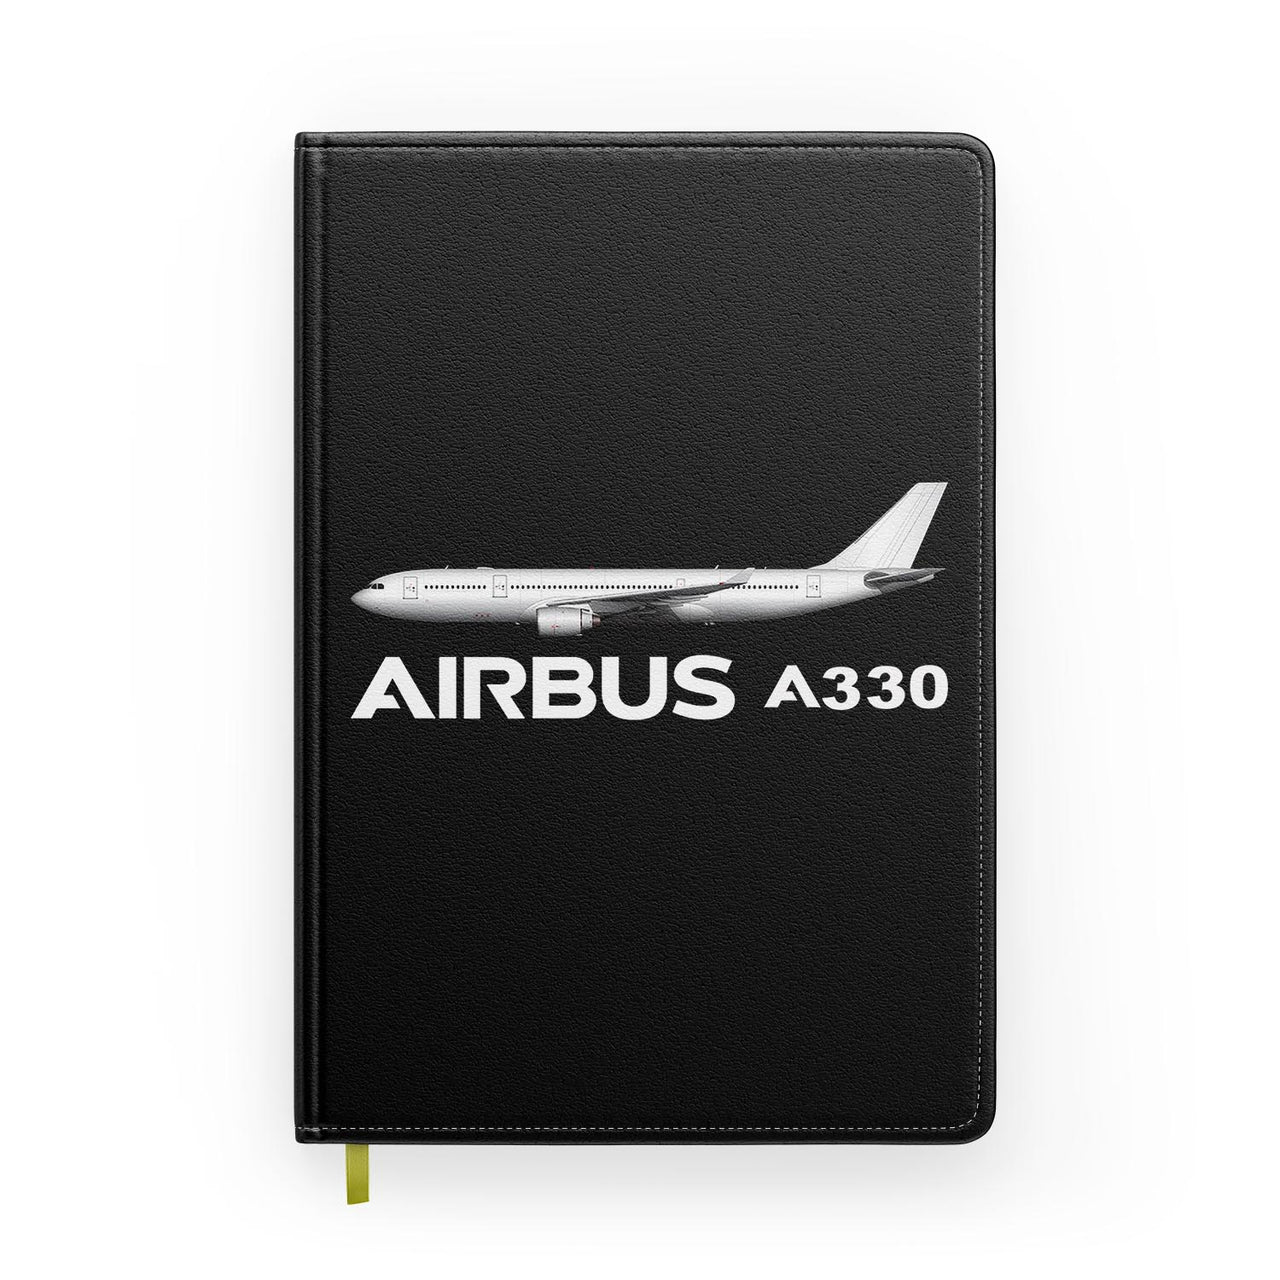 The Airbus A330 Designed Notebooks